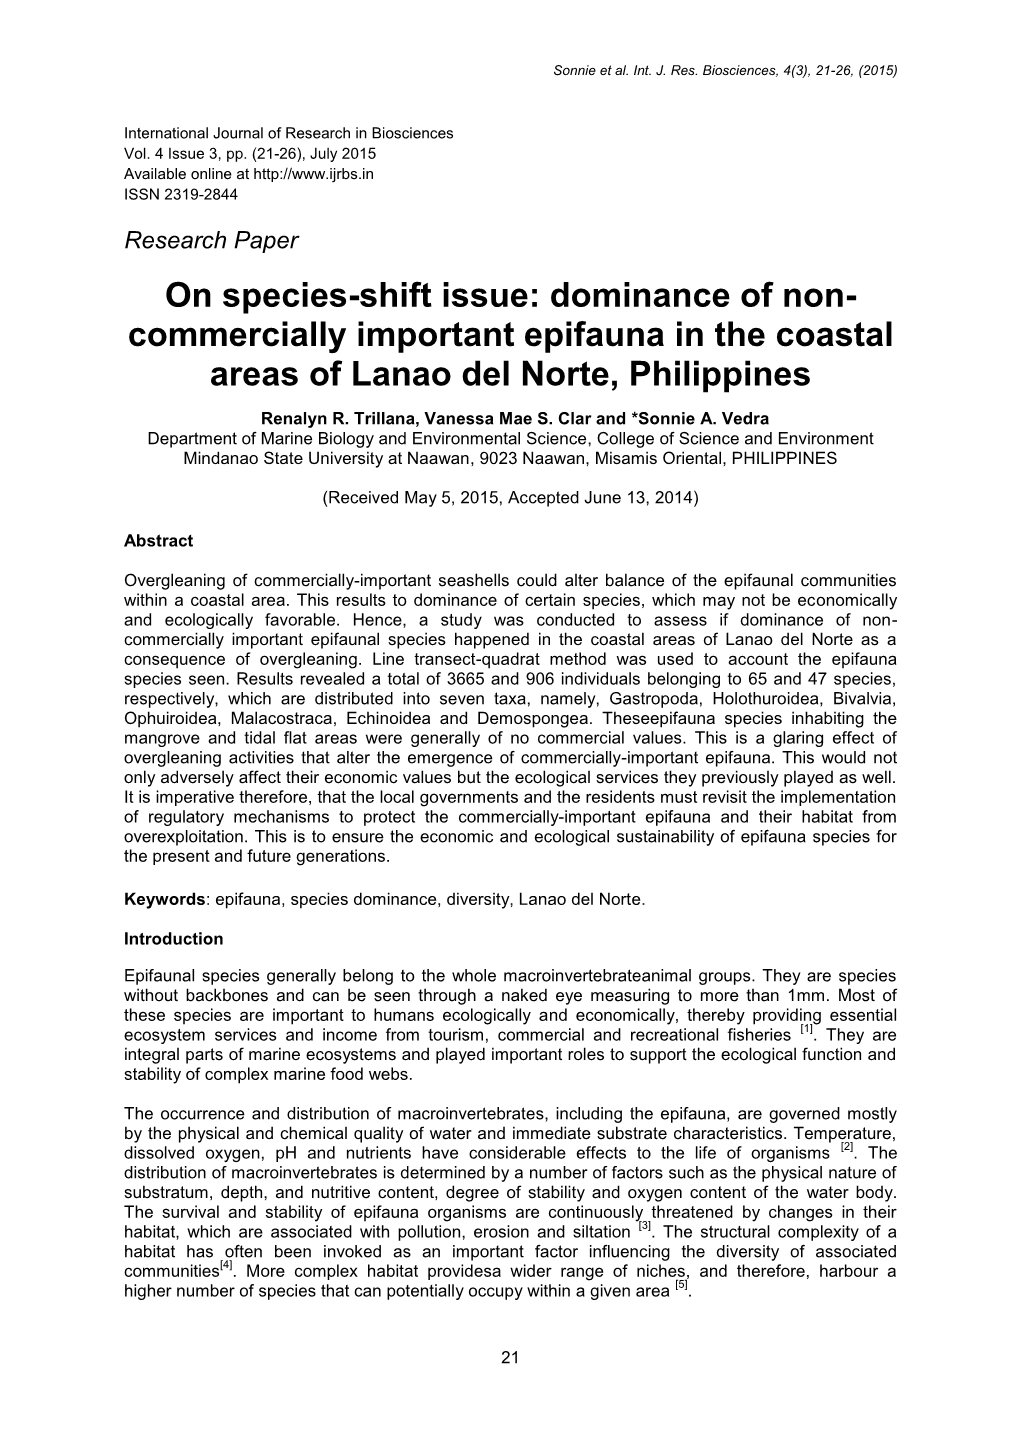 On Species-Shift Issue: Dominance of Non- Commercially Important Epifauna in the Coastal Areas of Lanao Del Norte, Philippines